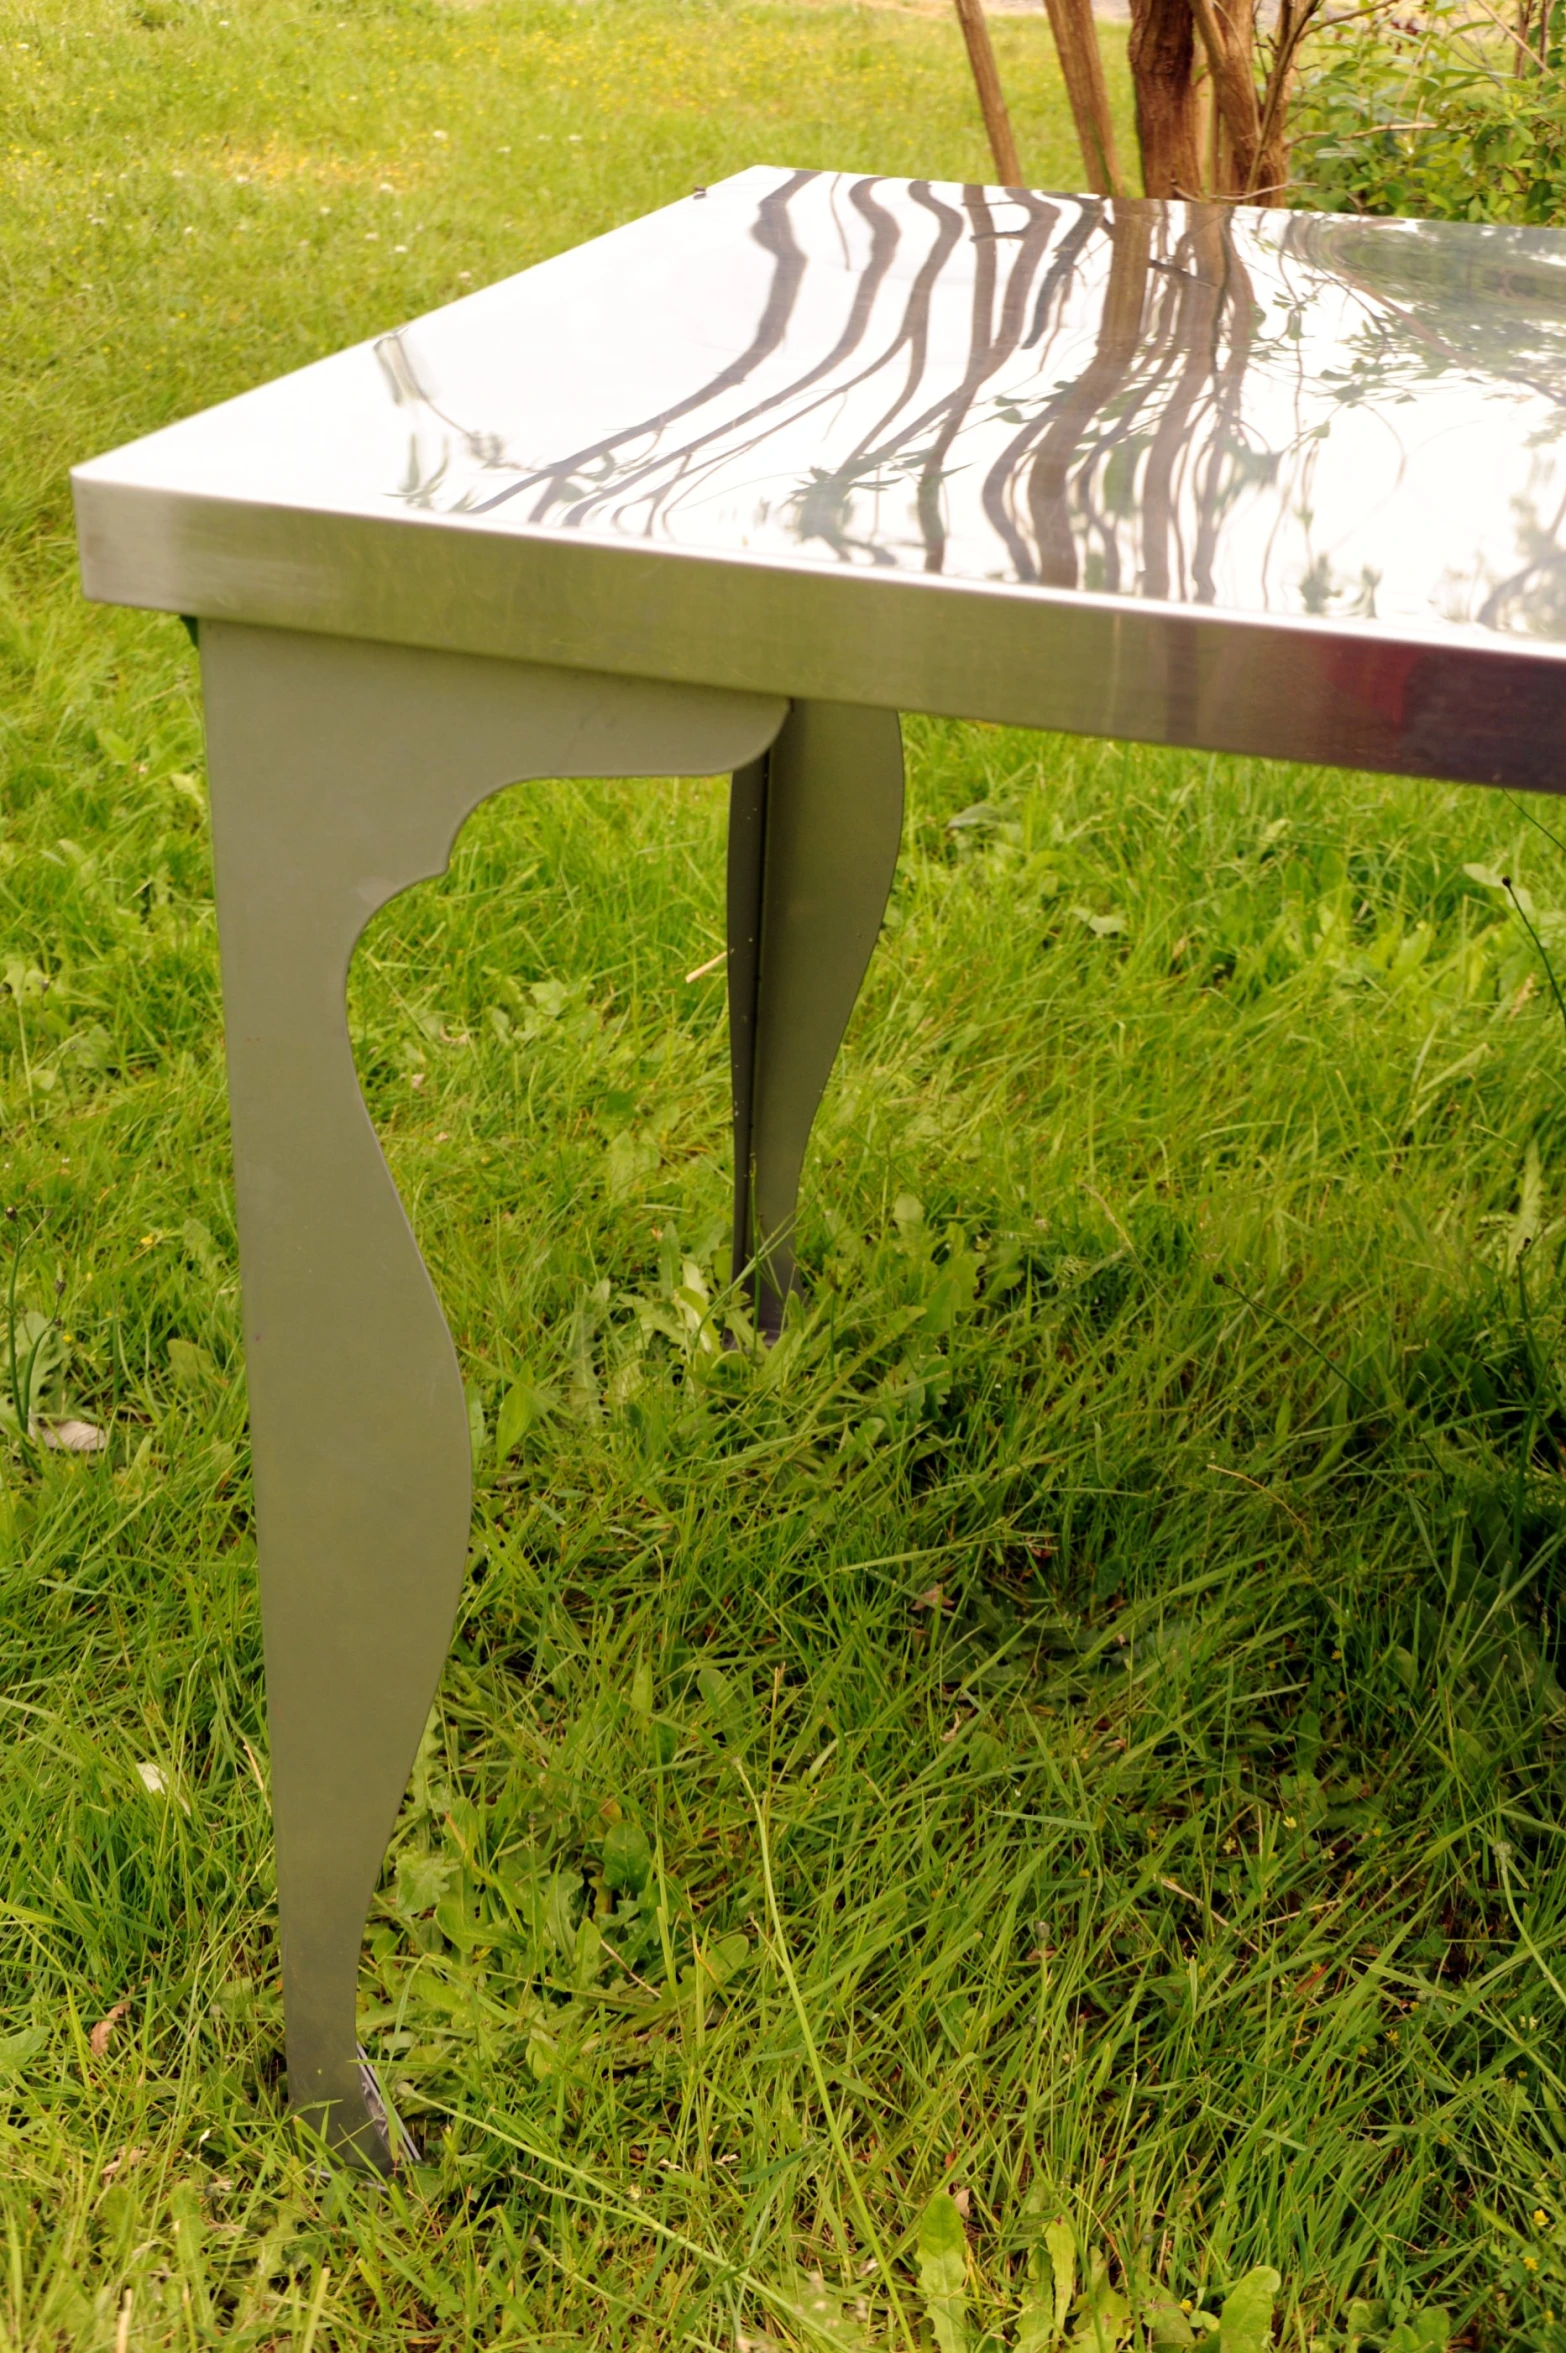 an unusual looking table on the grass